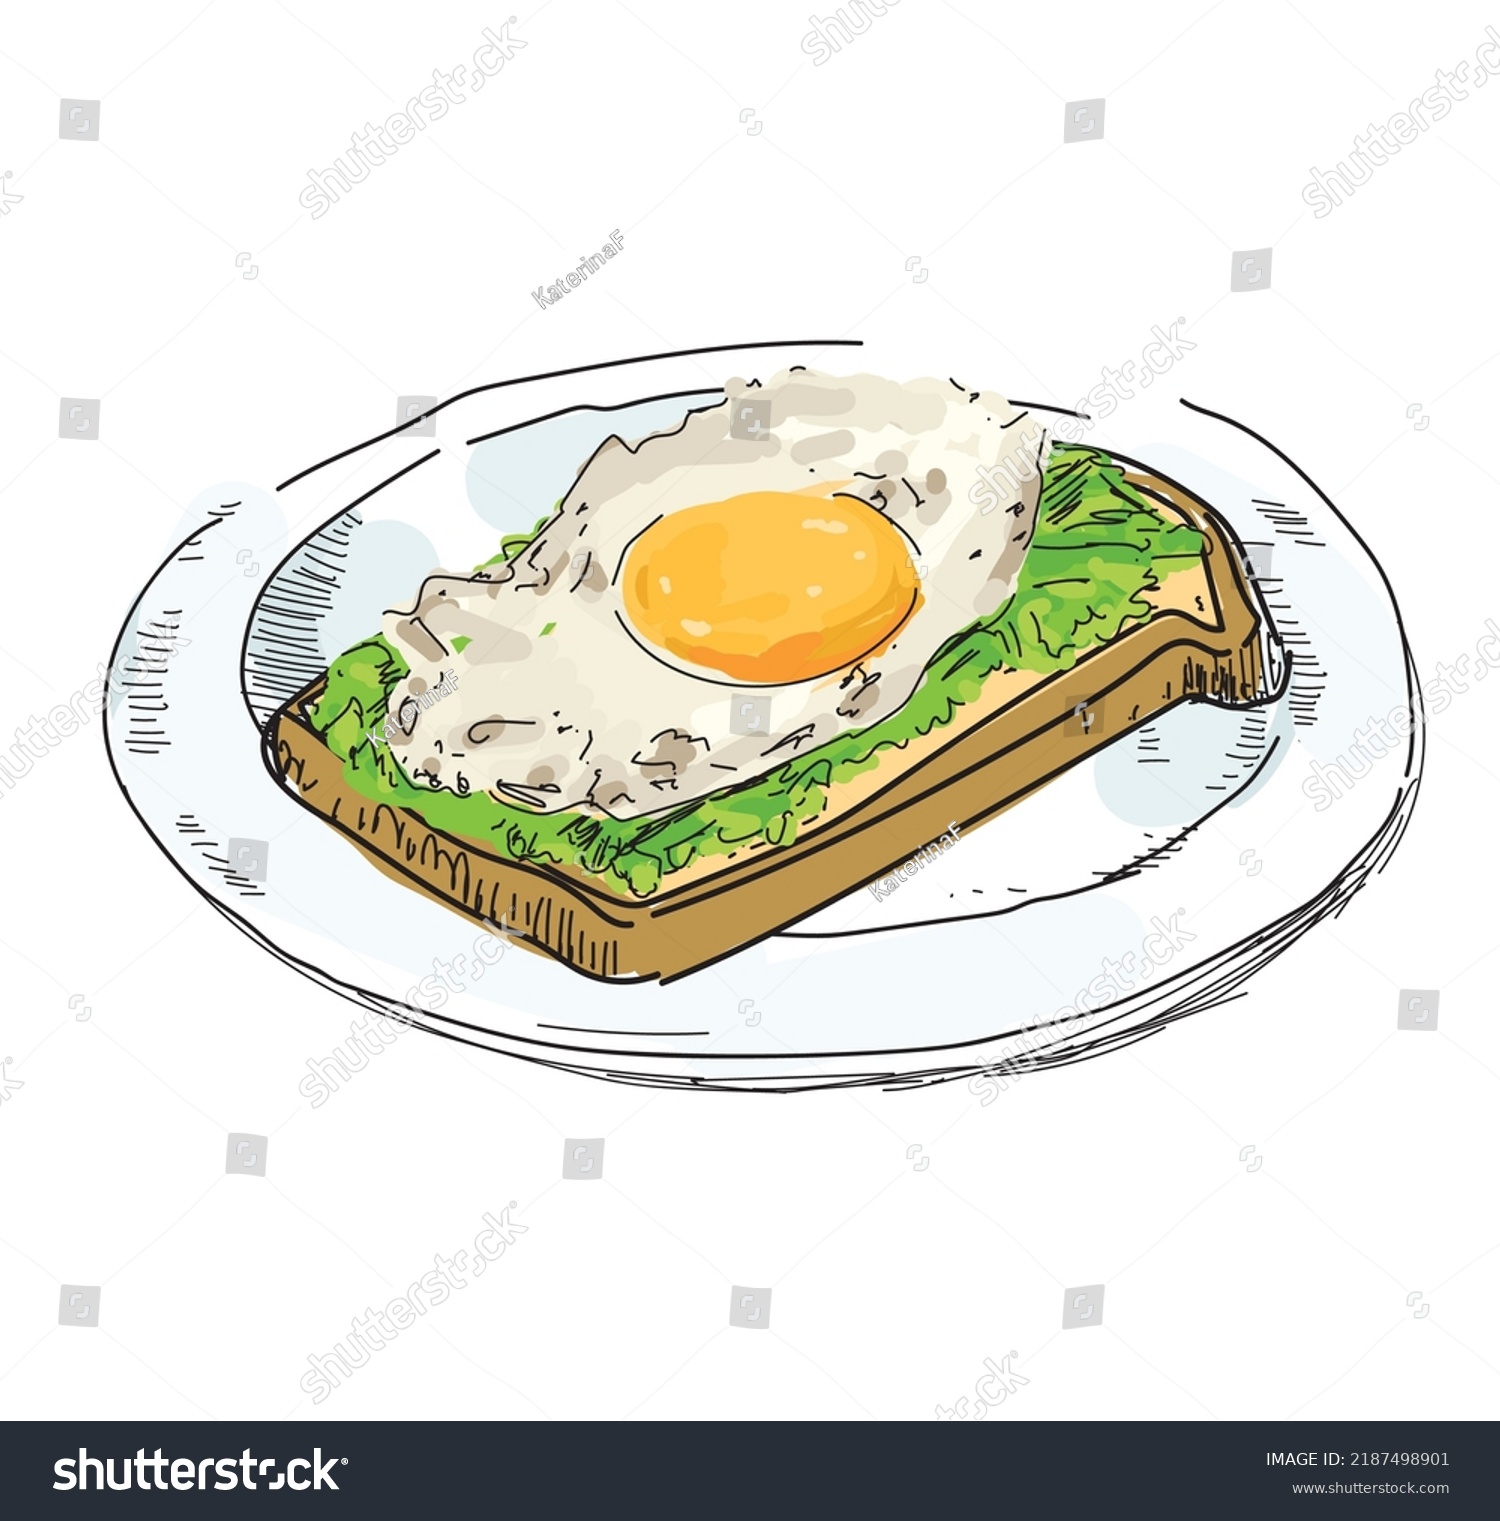 SVG of avocado toast with fried egg breakfast illustration traditional delicious food isolated on white background svg